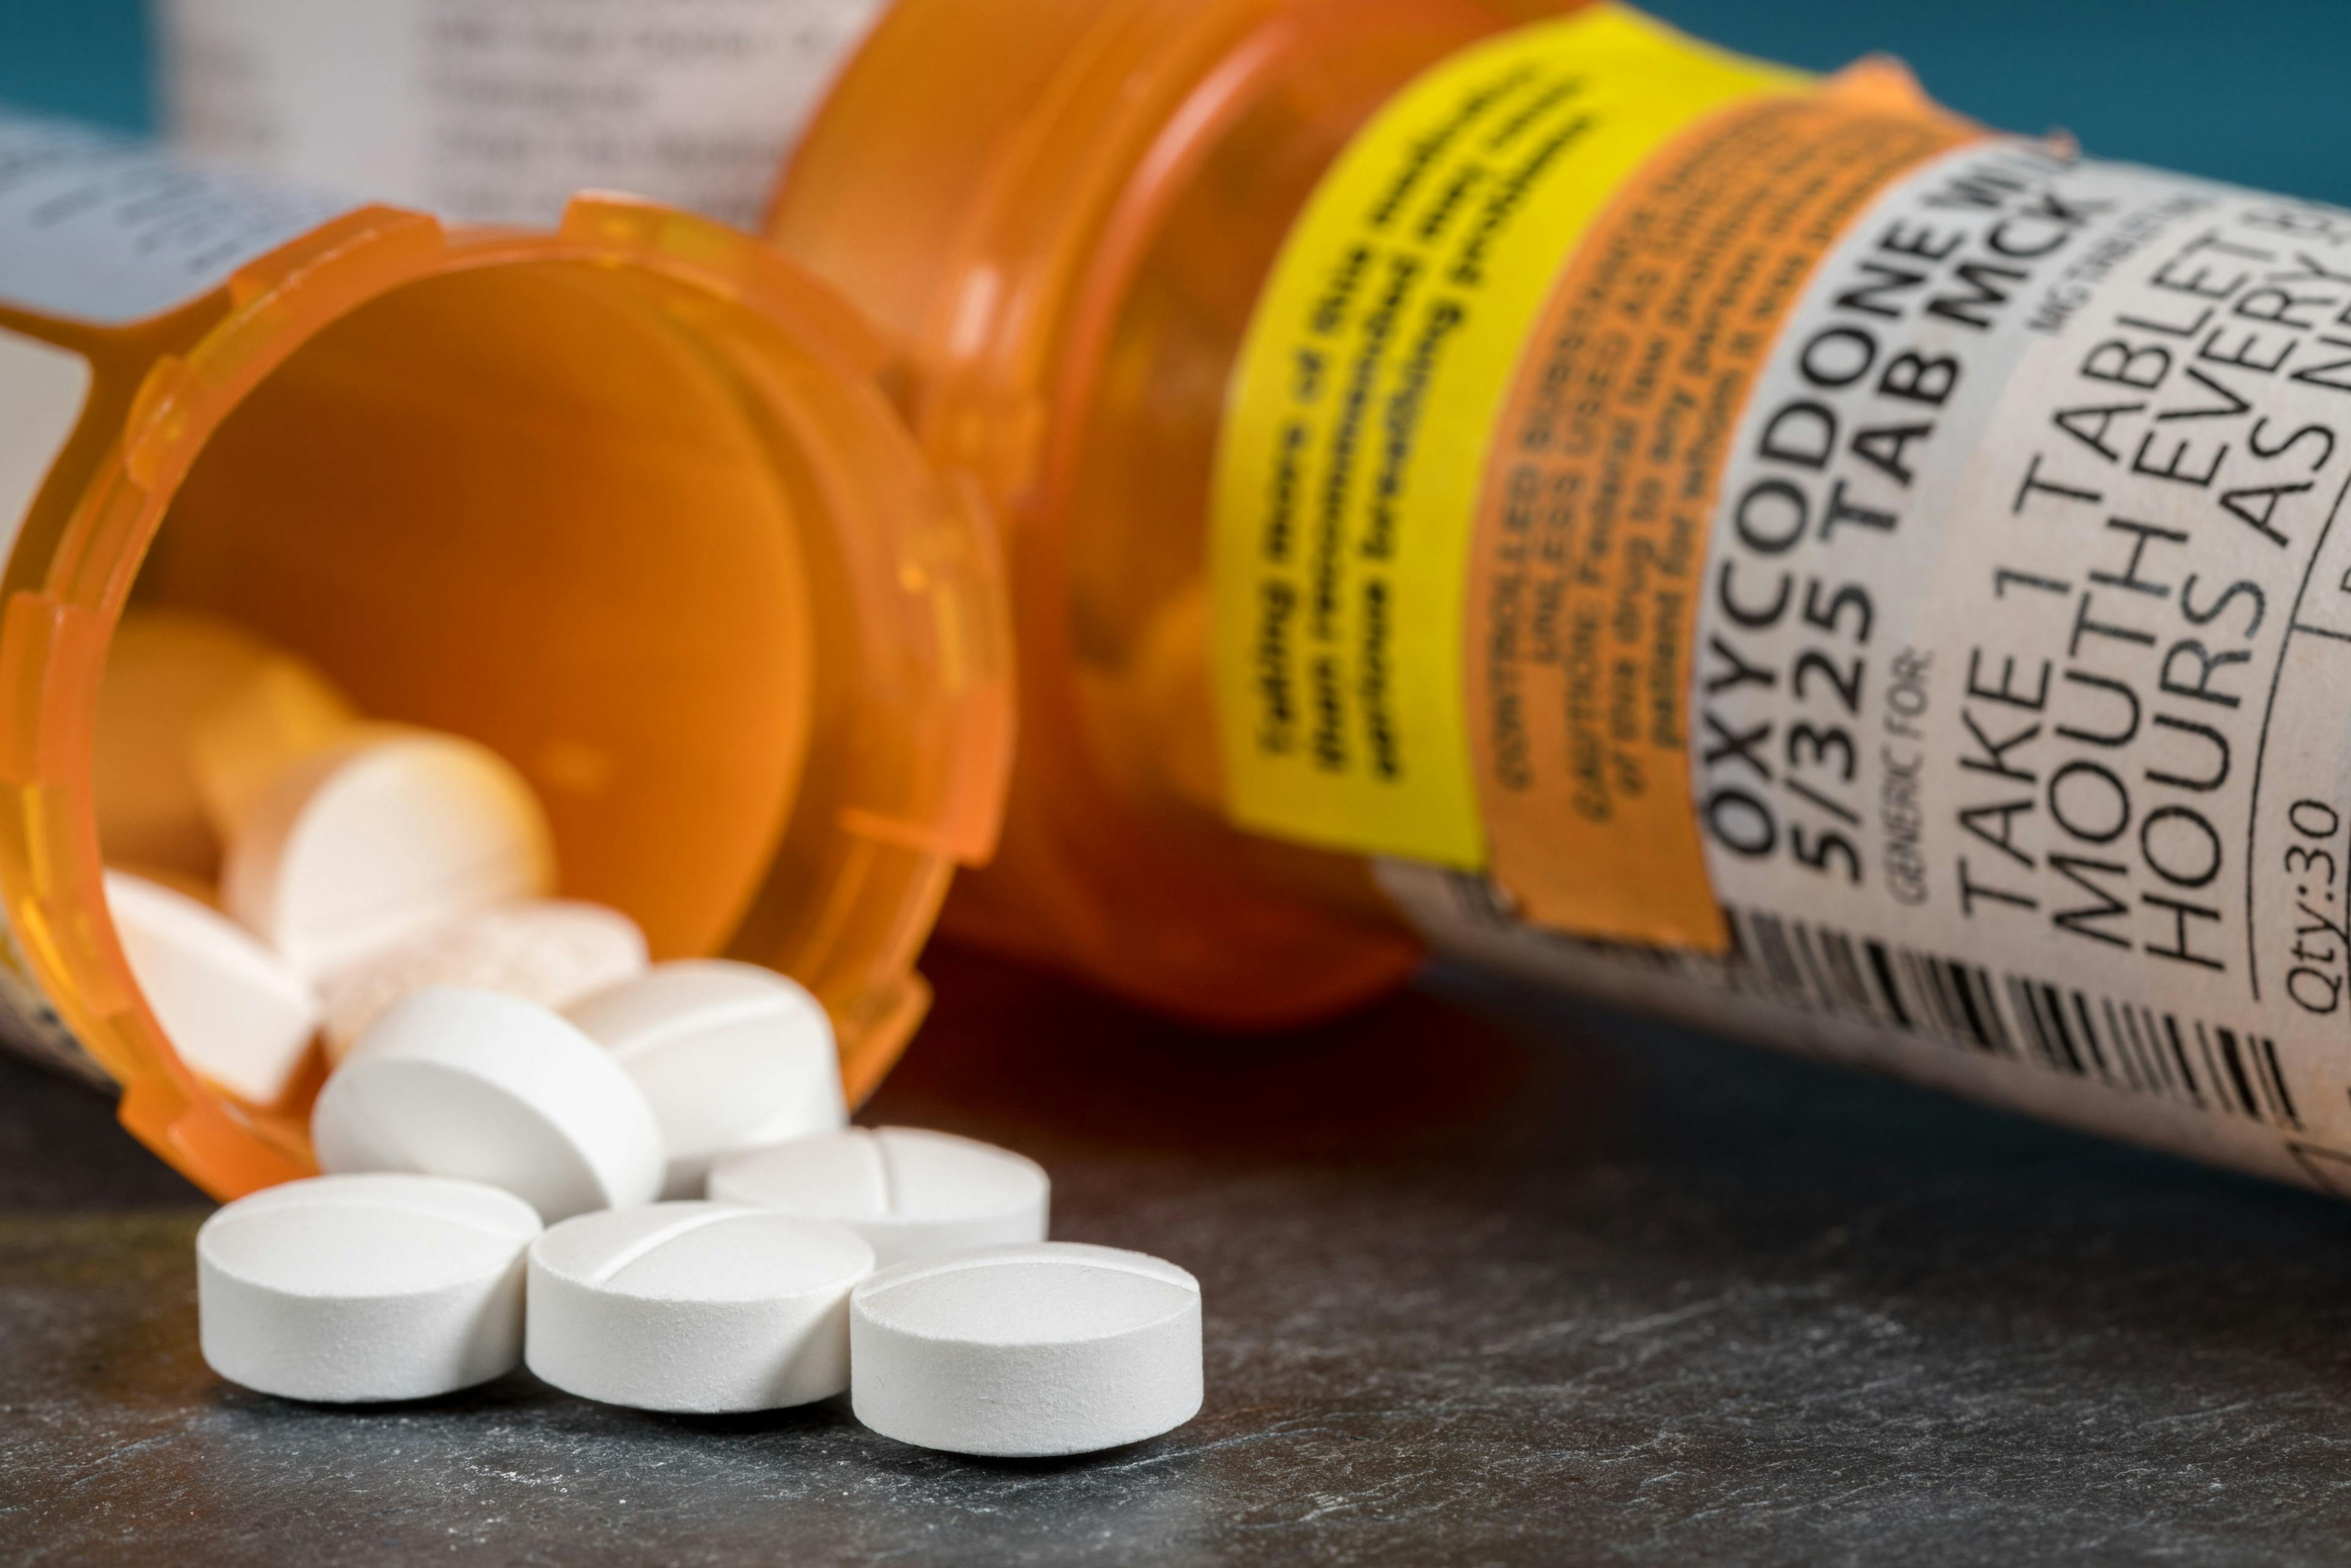 Examining Trends in Long-Term Opioid Use, Importance of Pharmacist-Physician Collaboration 